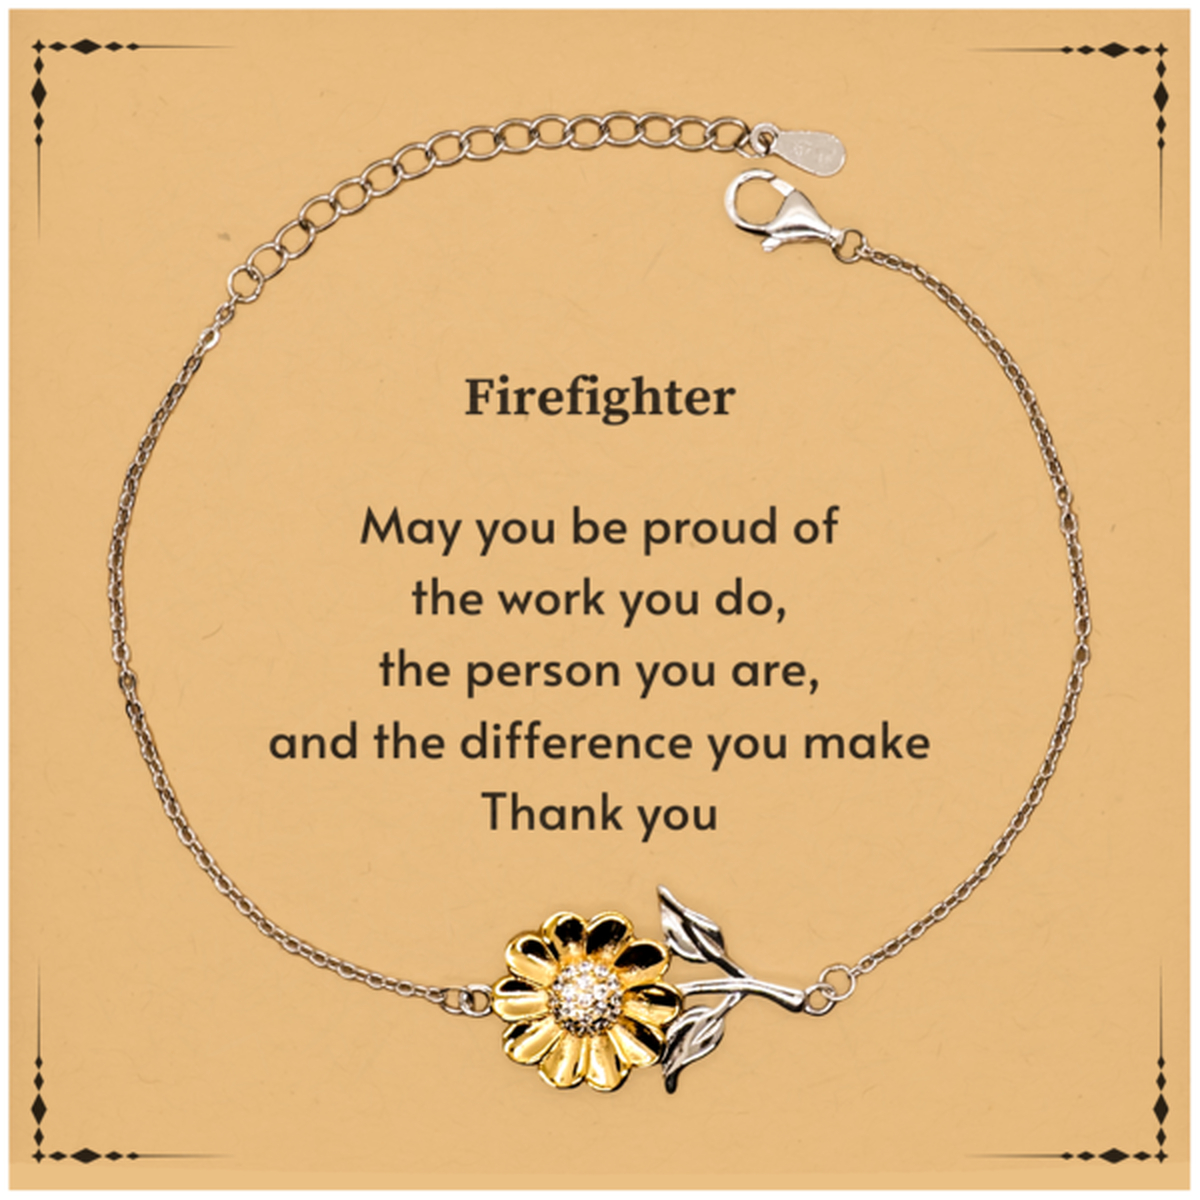 Heartwarming Sunflower Bracelet Retirement Coworkers Gifts for Firefighter, Firefighter May You be proud of the work you do, the person you are Gifts for Boss Men Women Friends